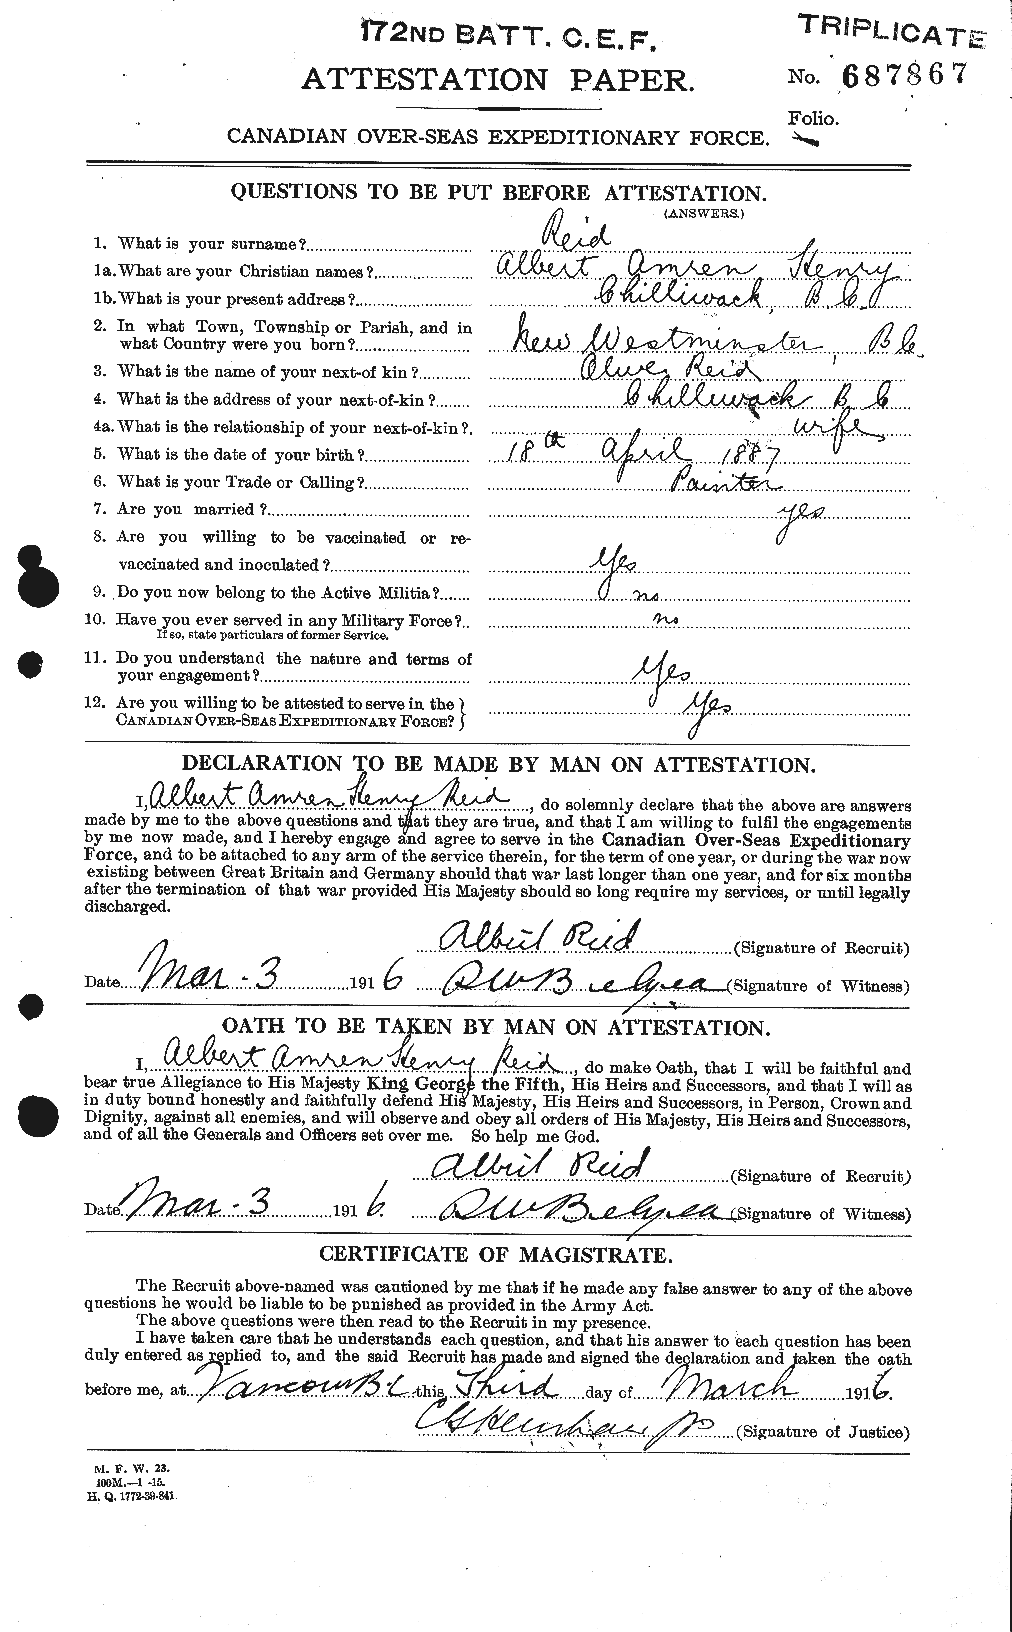 Personnel Records of the First World War - CEF 597744a